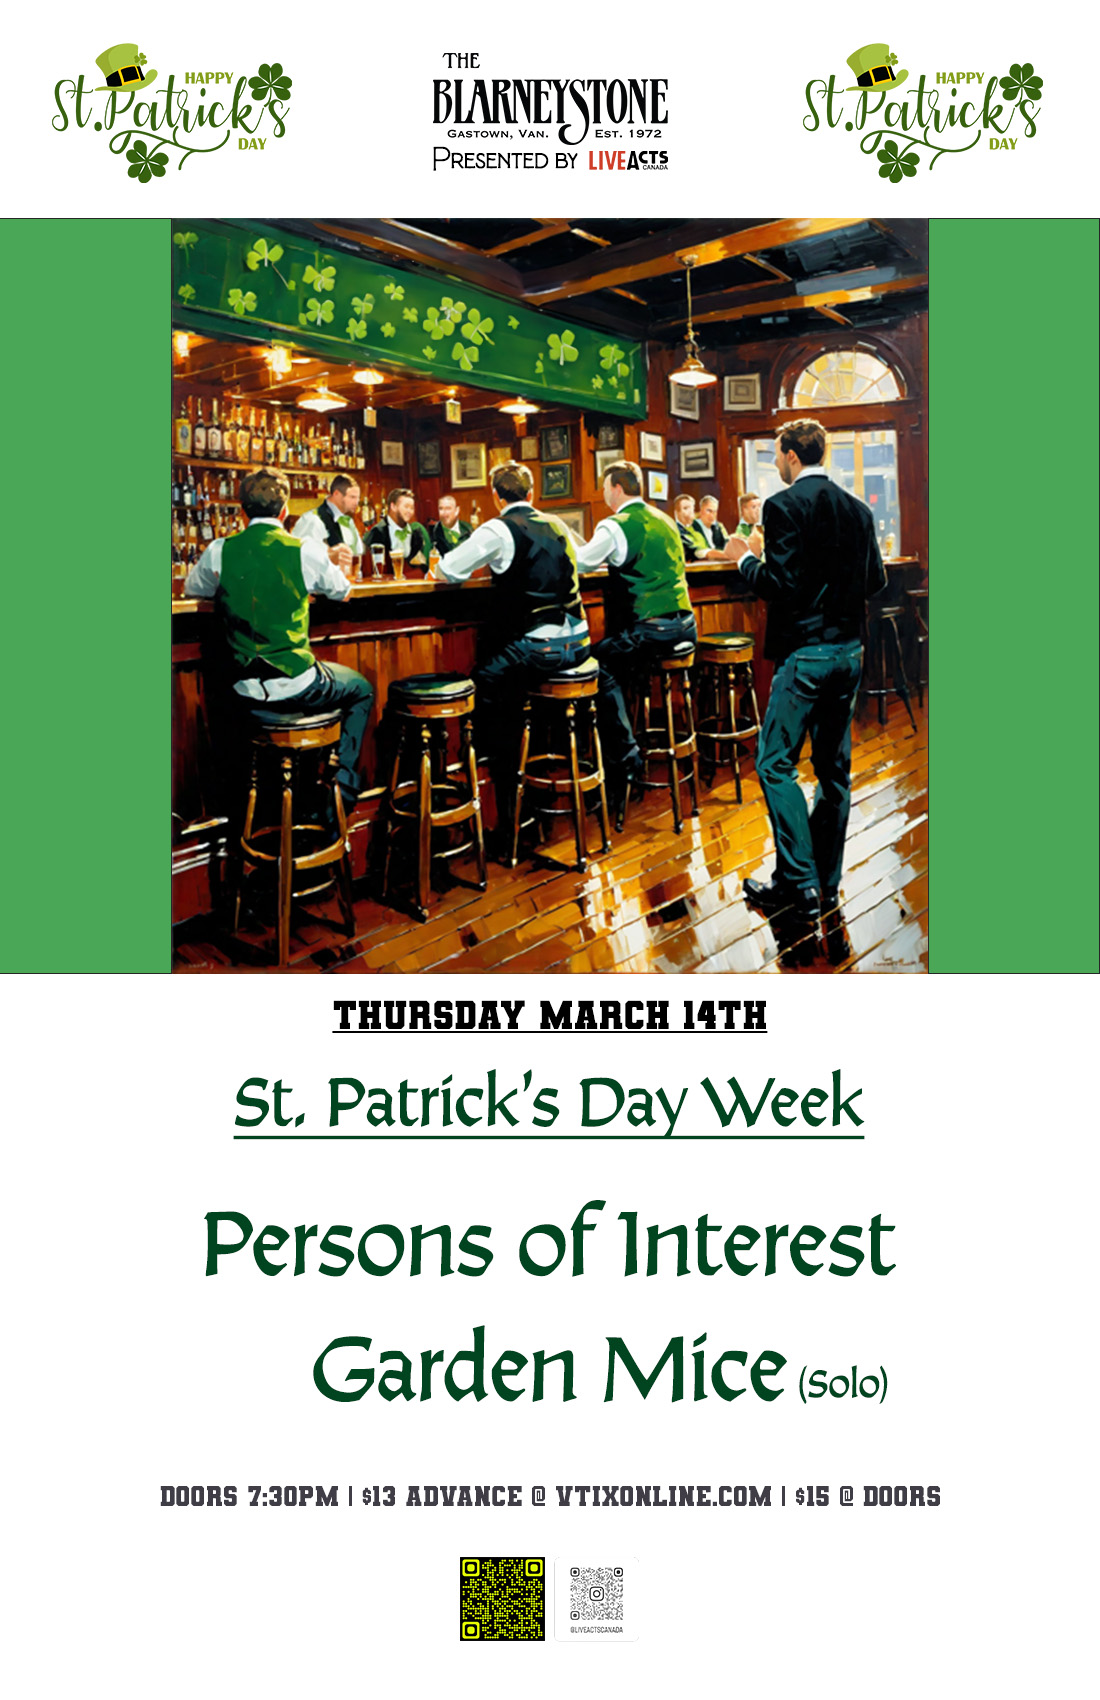 Persons of Interest w/ Garden Mice (solo)